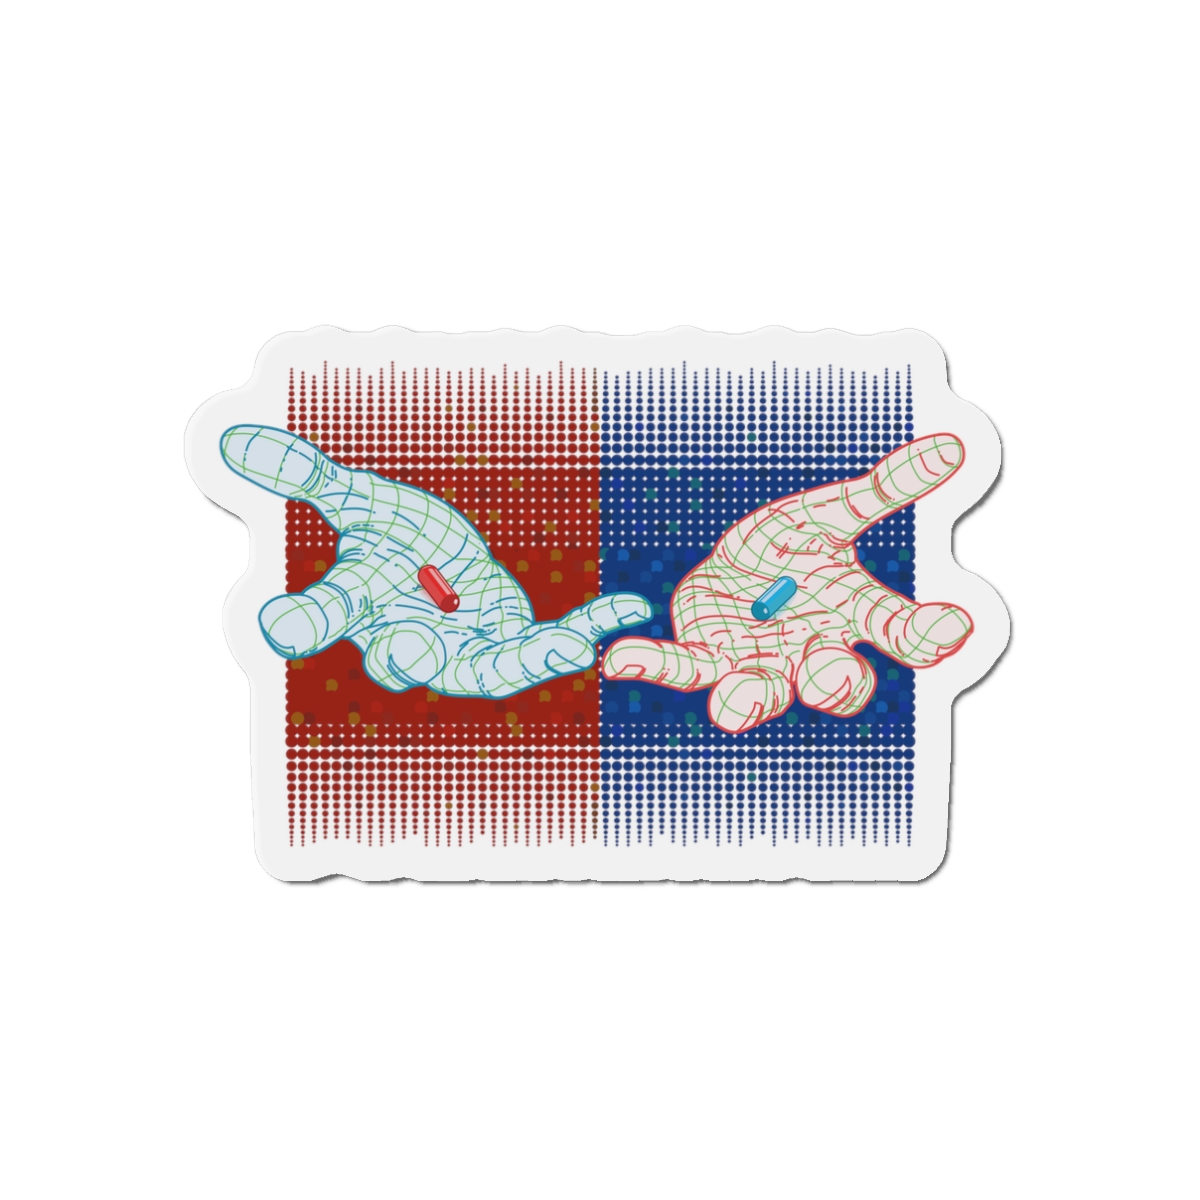 Two Hands (red & blue) - Die-Cut Magnet